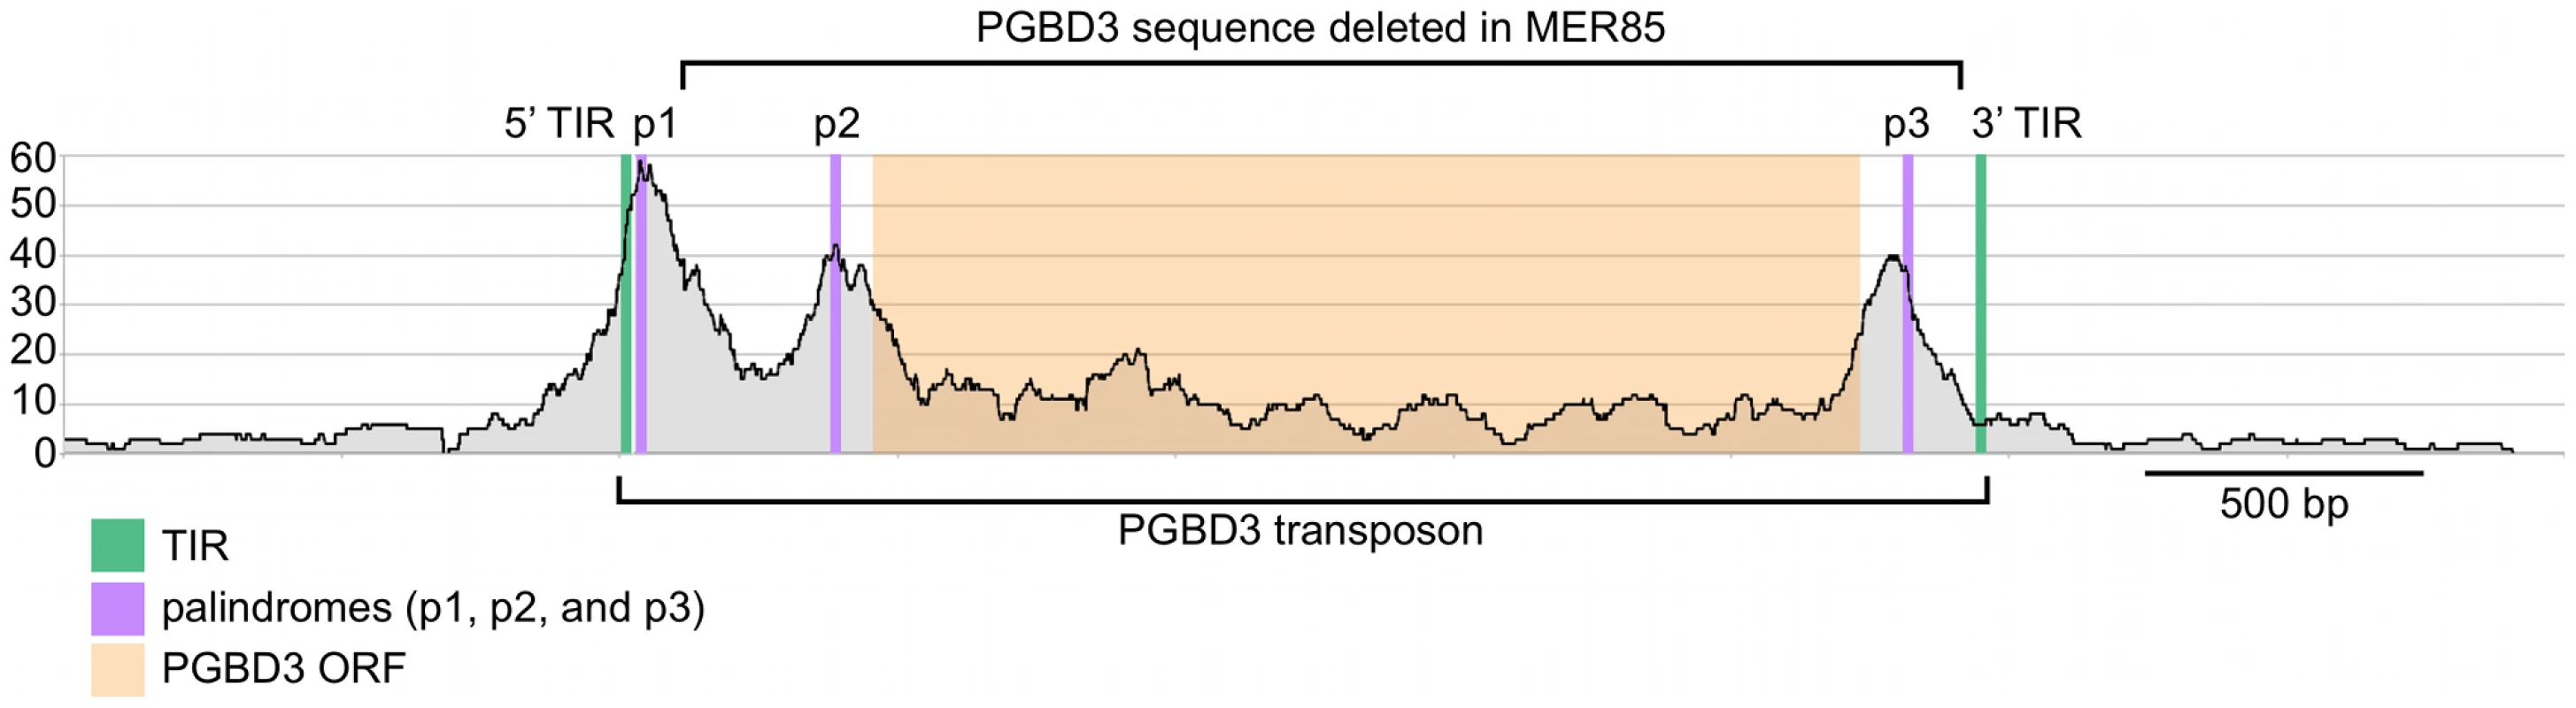 Fragment overlaps in the vicinity of the PGBD3 transposon reveal strong binding near each of three palindromes.